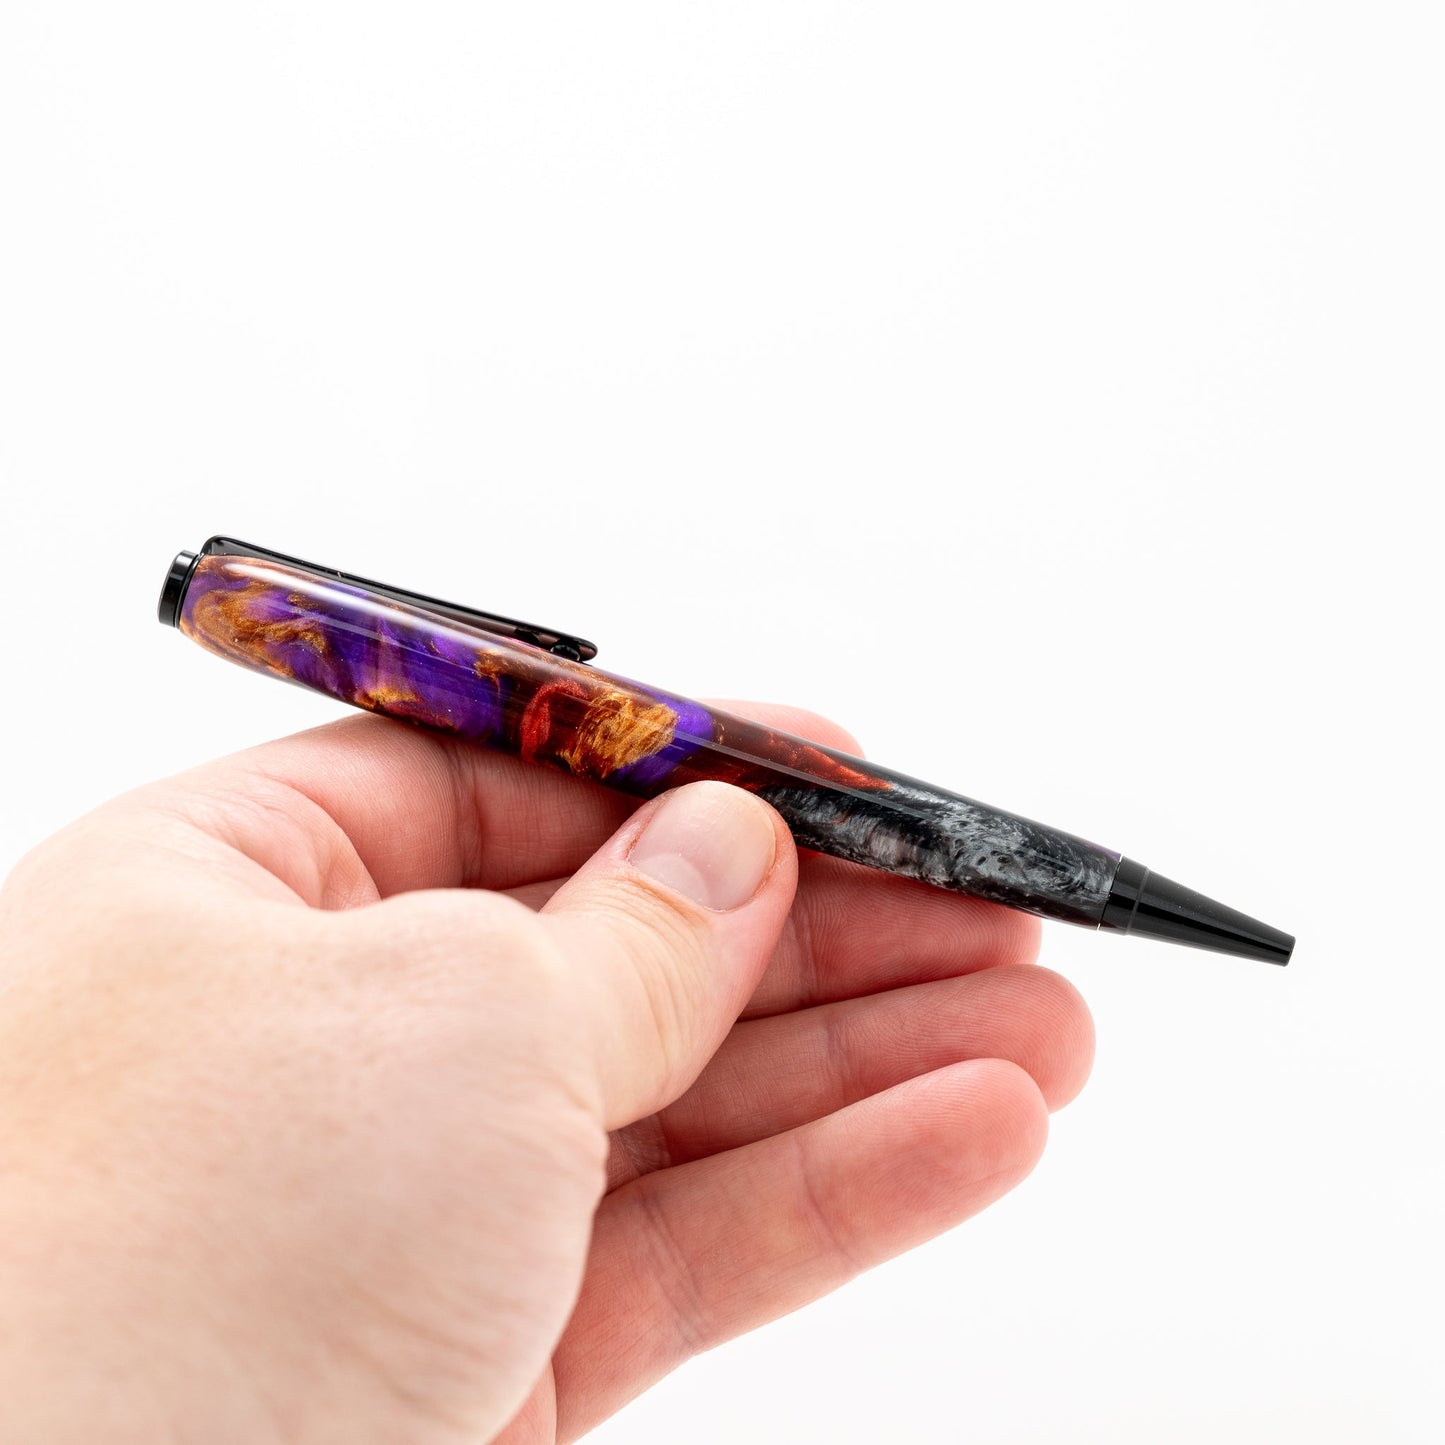 Handmade red, purple, black, grey and bronze swirled resin ballpoint twist pen with black chrome plating held in a hand